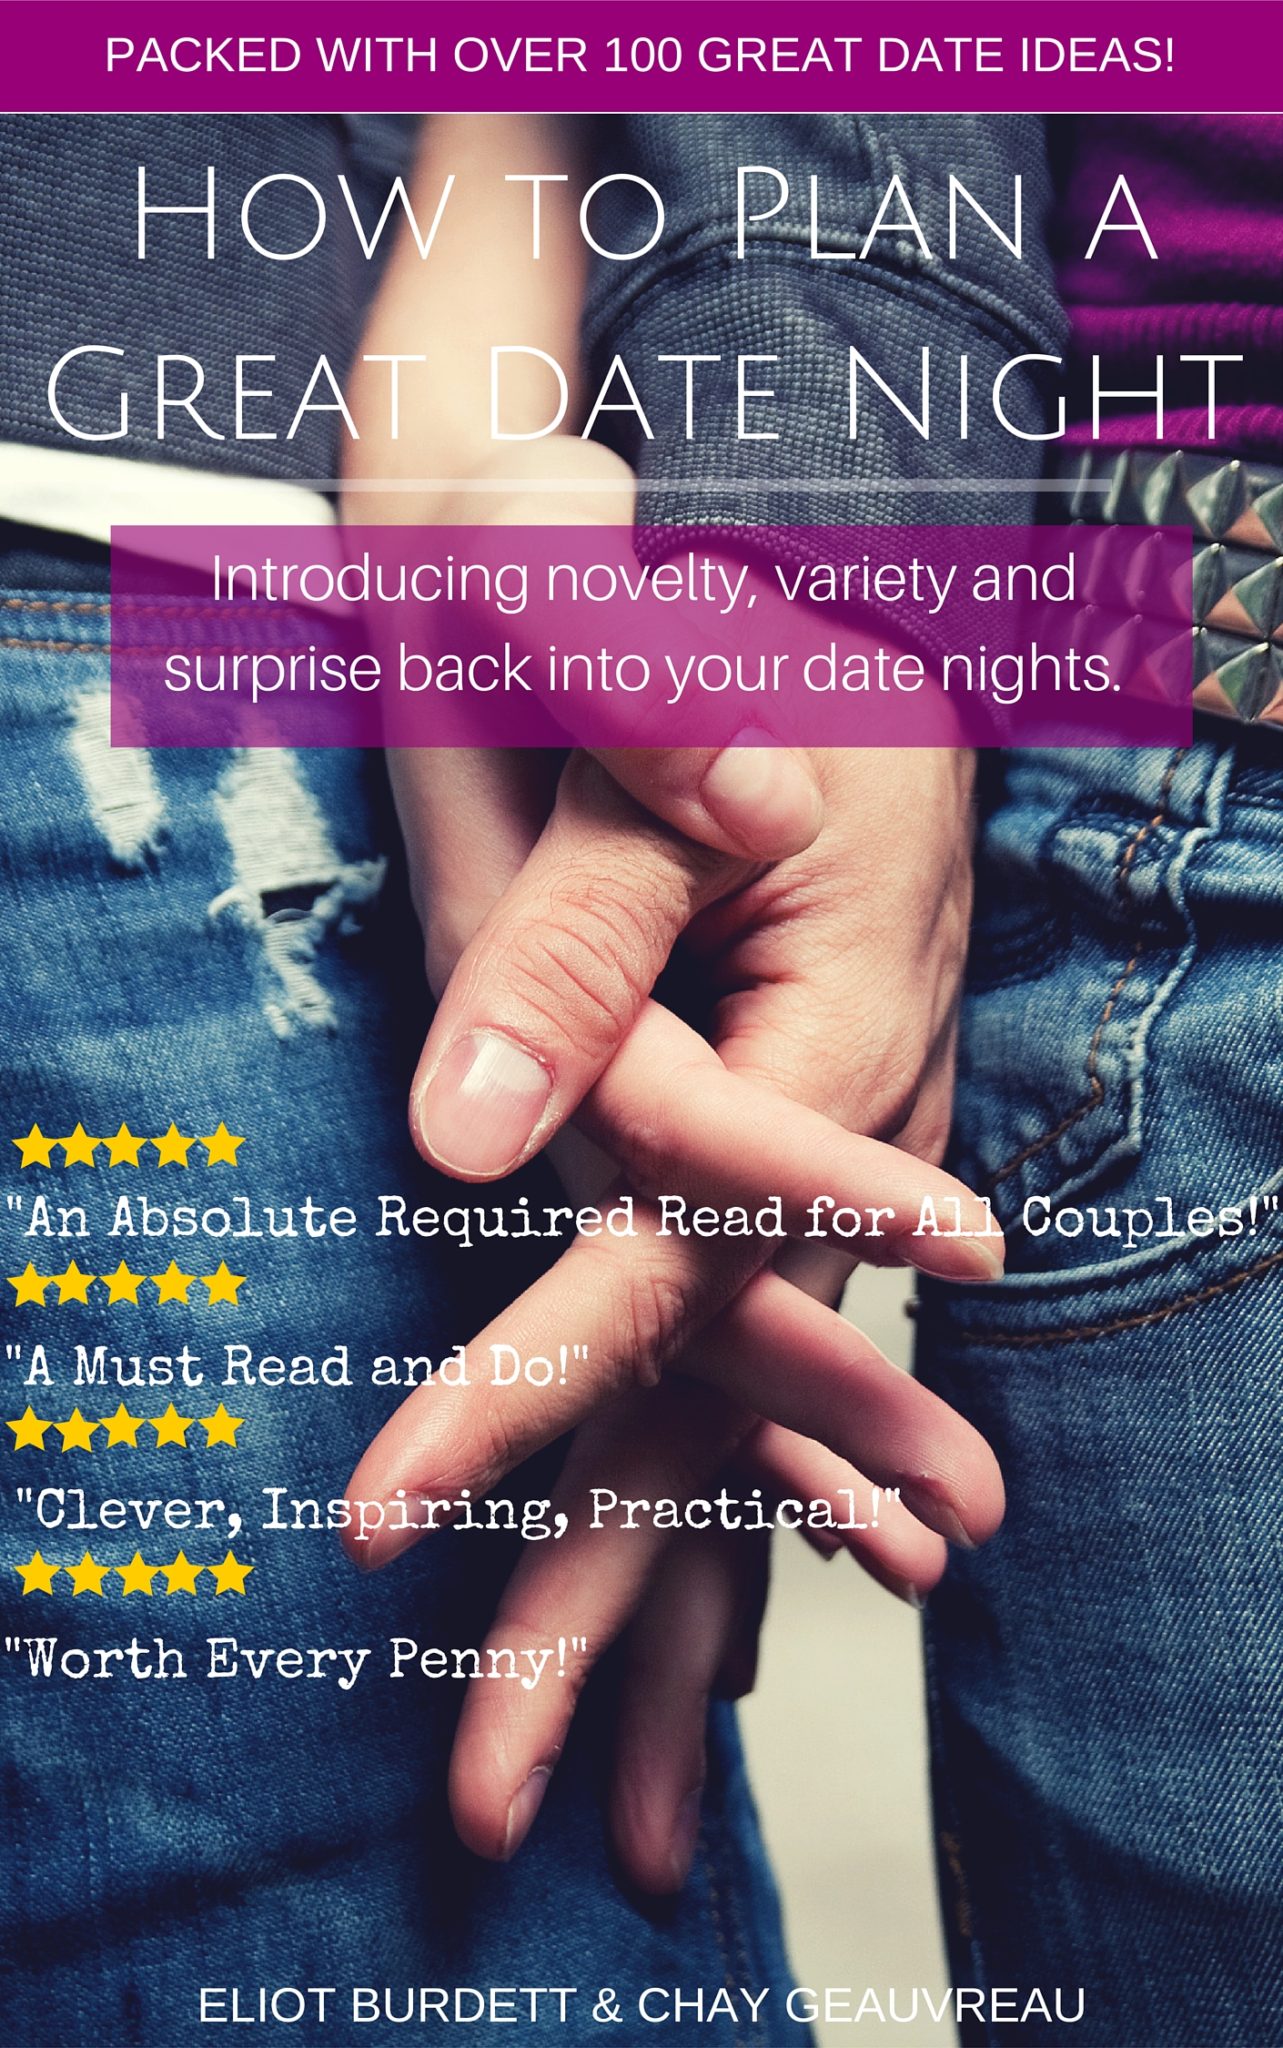 How to Plan a Great Date Night by Eliot Burdett and Chay Geauvreau